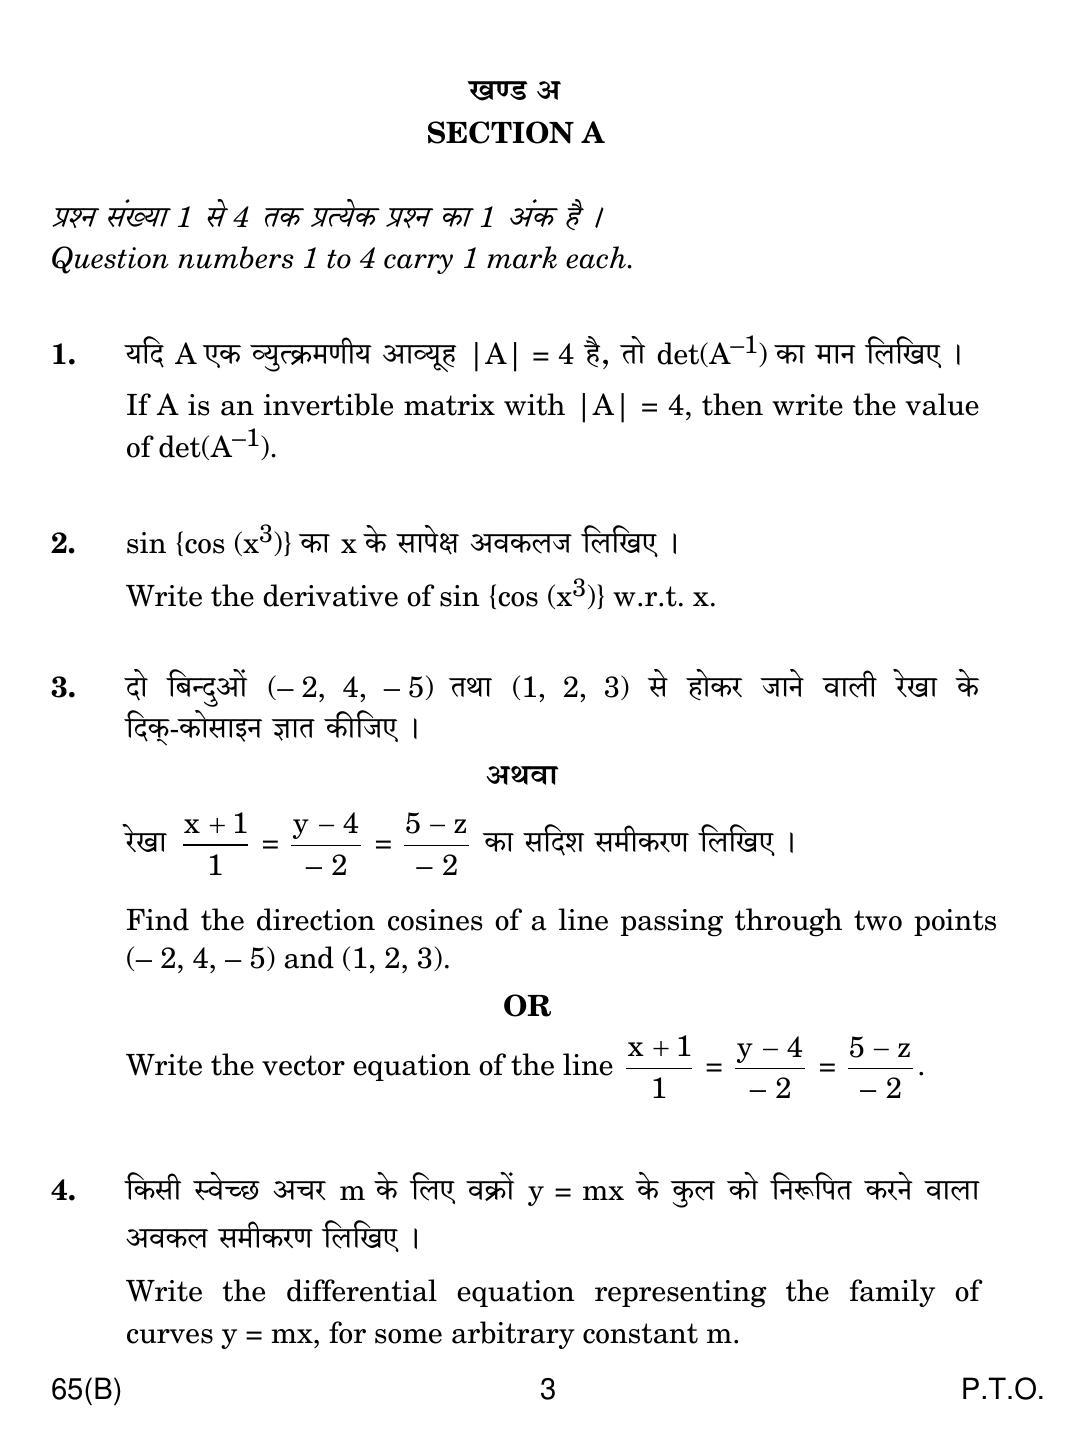 CBSE Class 12 65(B) MATHS For Blind Candidates 2019 Compartment Question Paper - Page 3